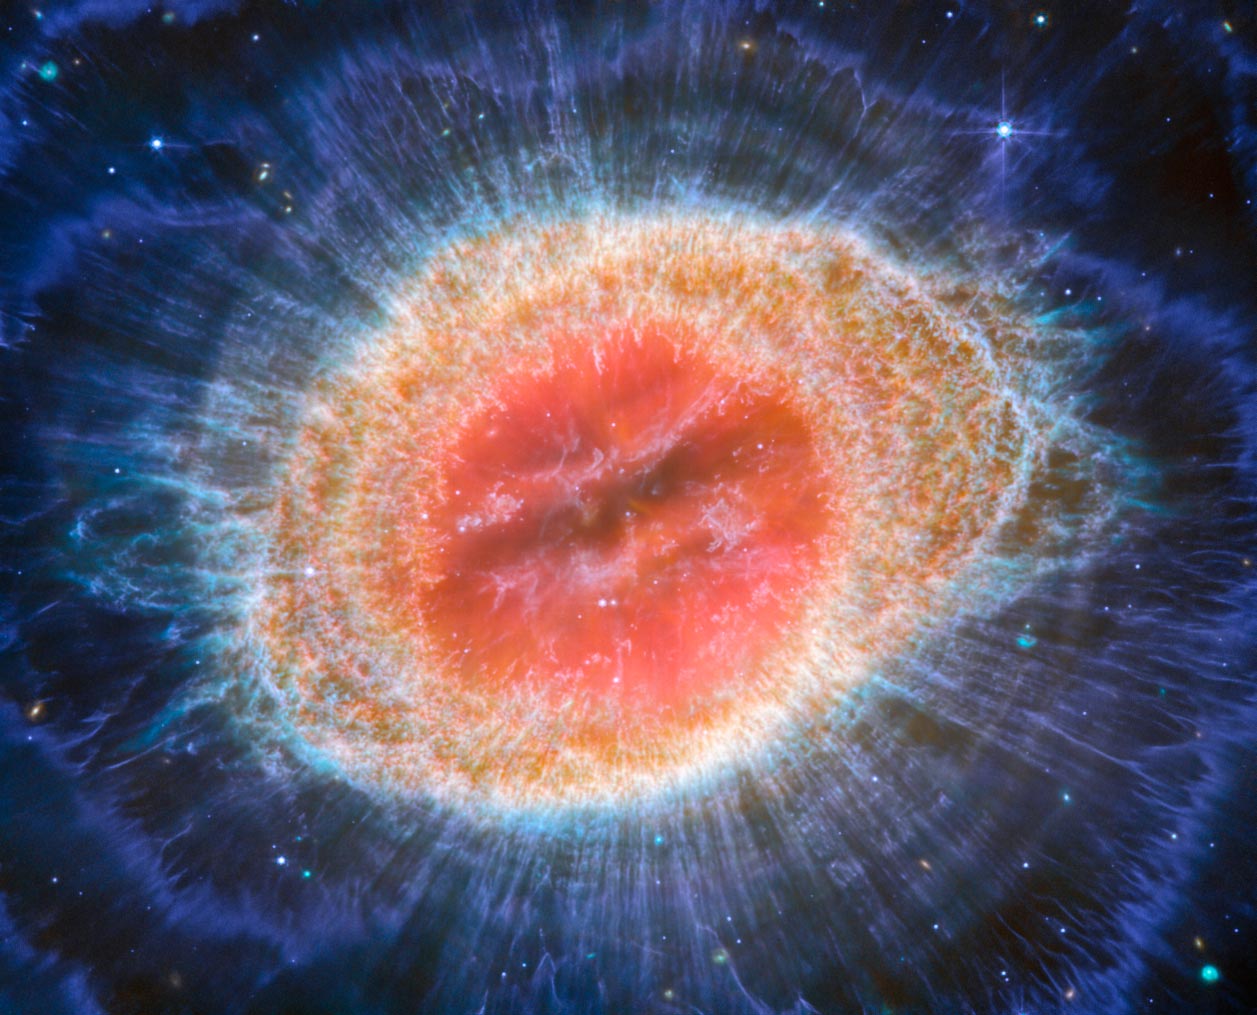 Intricate details in the remains of a dying star